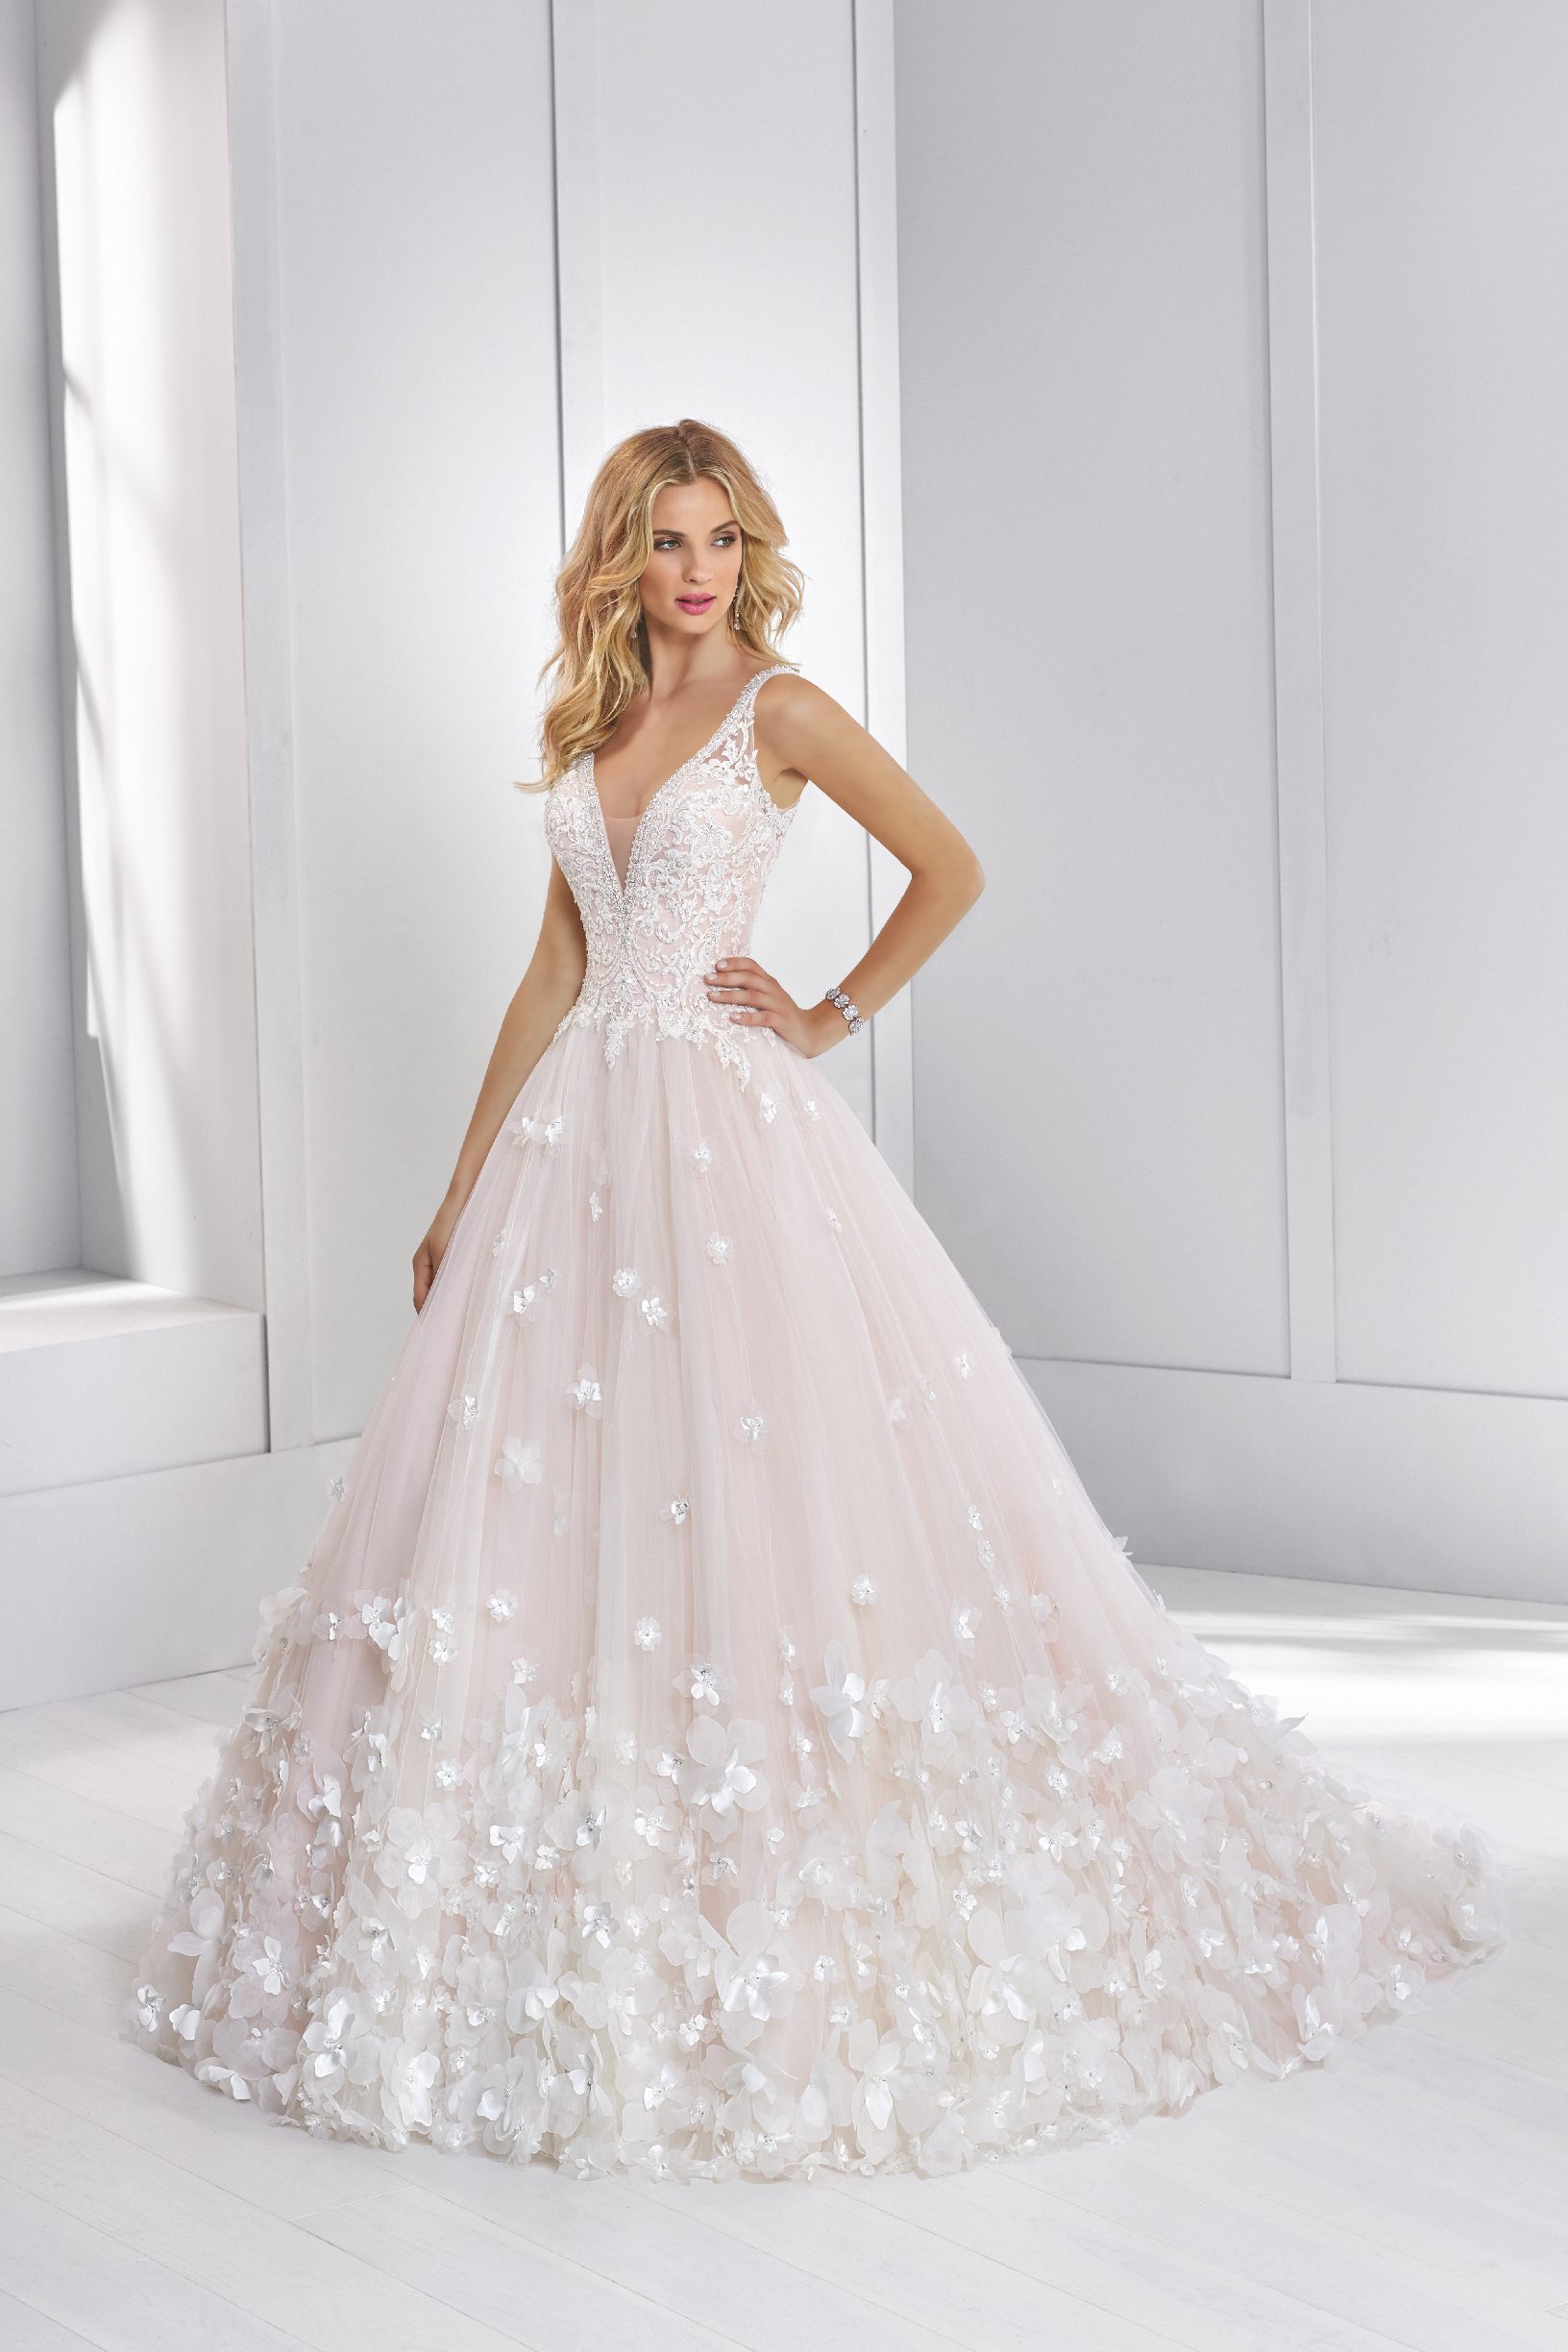 Model wearing Ronald Joyce wedding dress style 69326 - a beautiful ballgown with 3D flowers that's perfect for brides who need a wedding dress quickly.